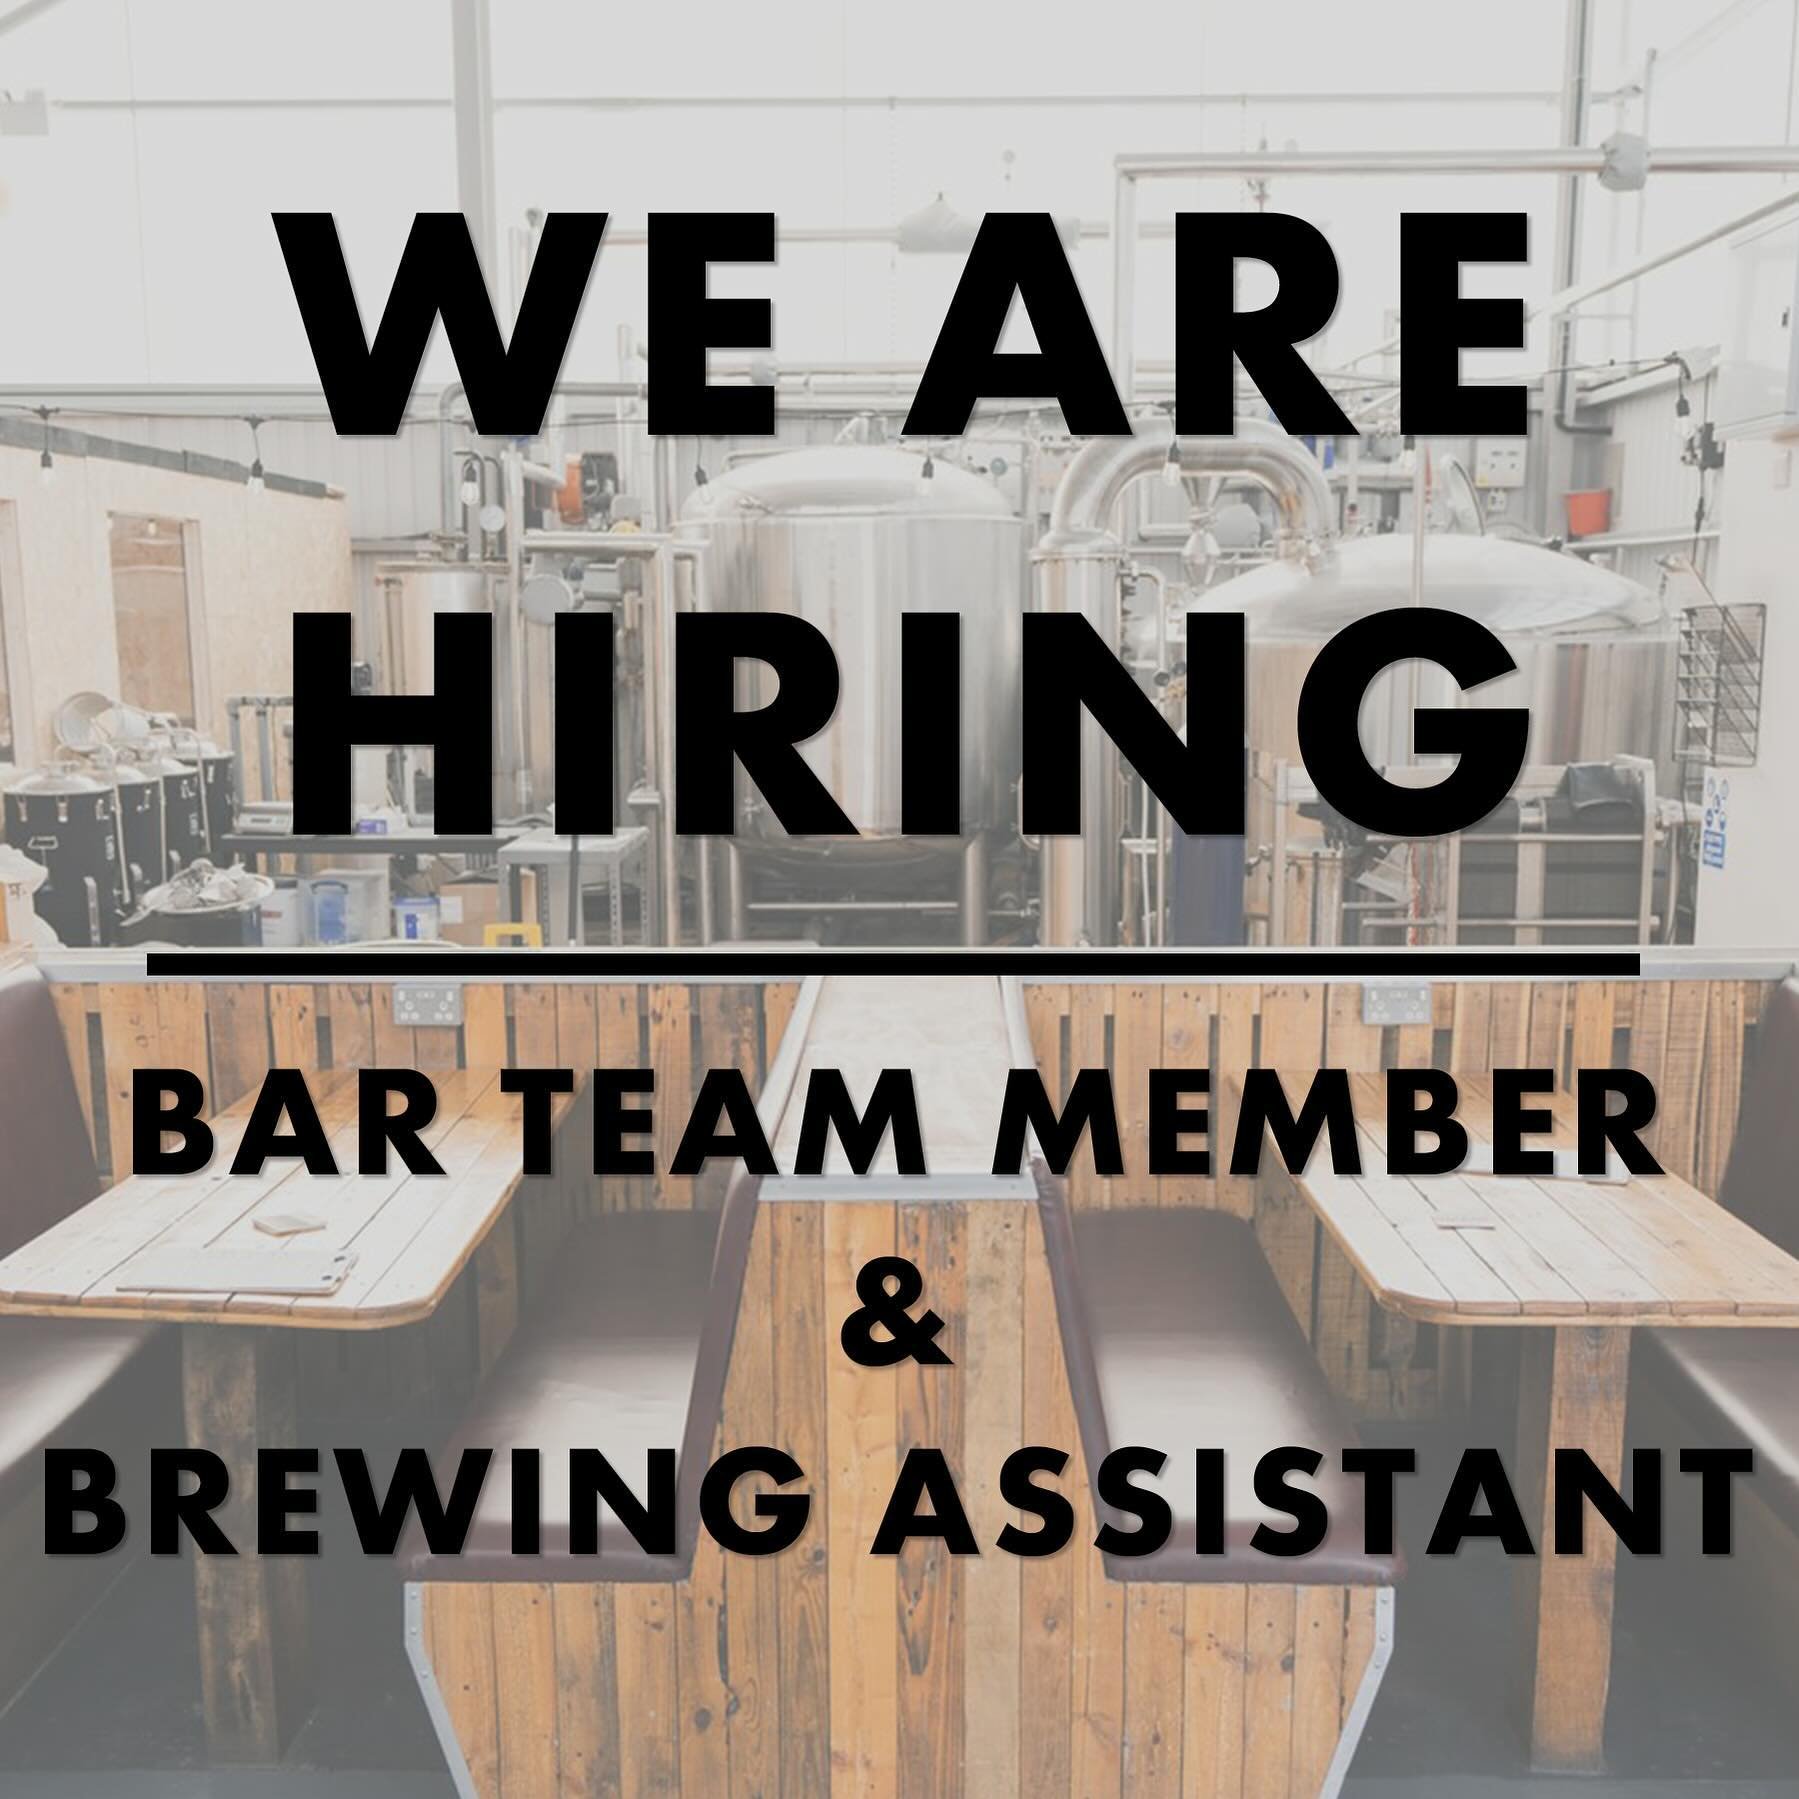 Glen Affric Brewery &amp; Taproom are looking to add a hard working member to our team to be part of the Bar Staff &amp; as a Brewing Assistant.&nbsp;

Pay is National Living Wage and you&rsquo;d also get 20% staff discount on merch, drinks and takea